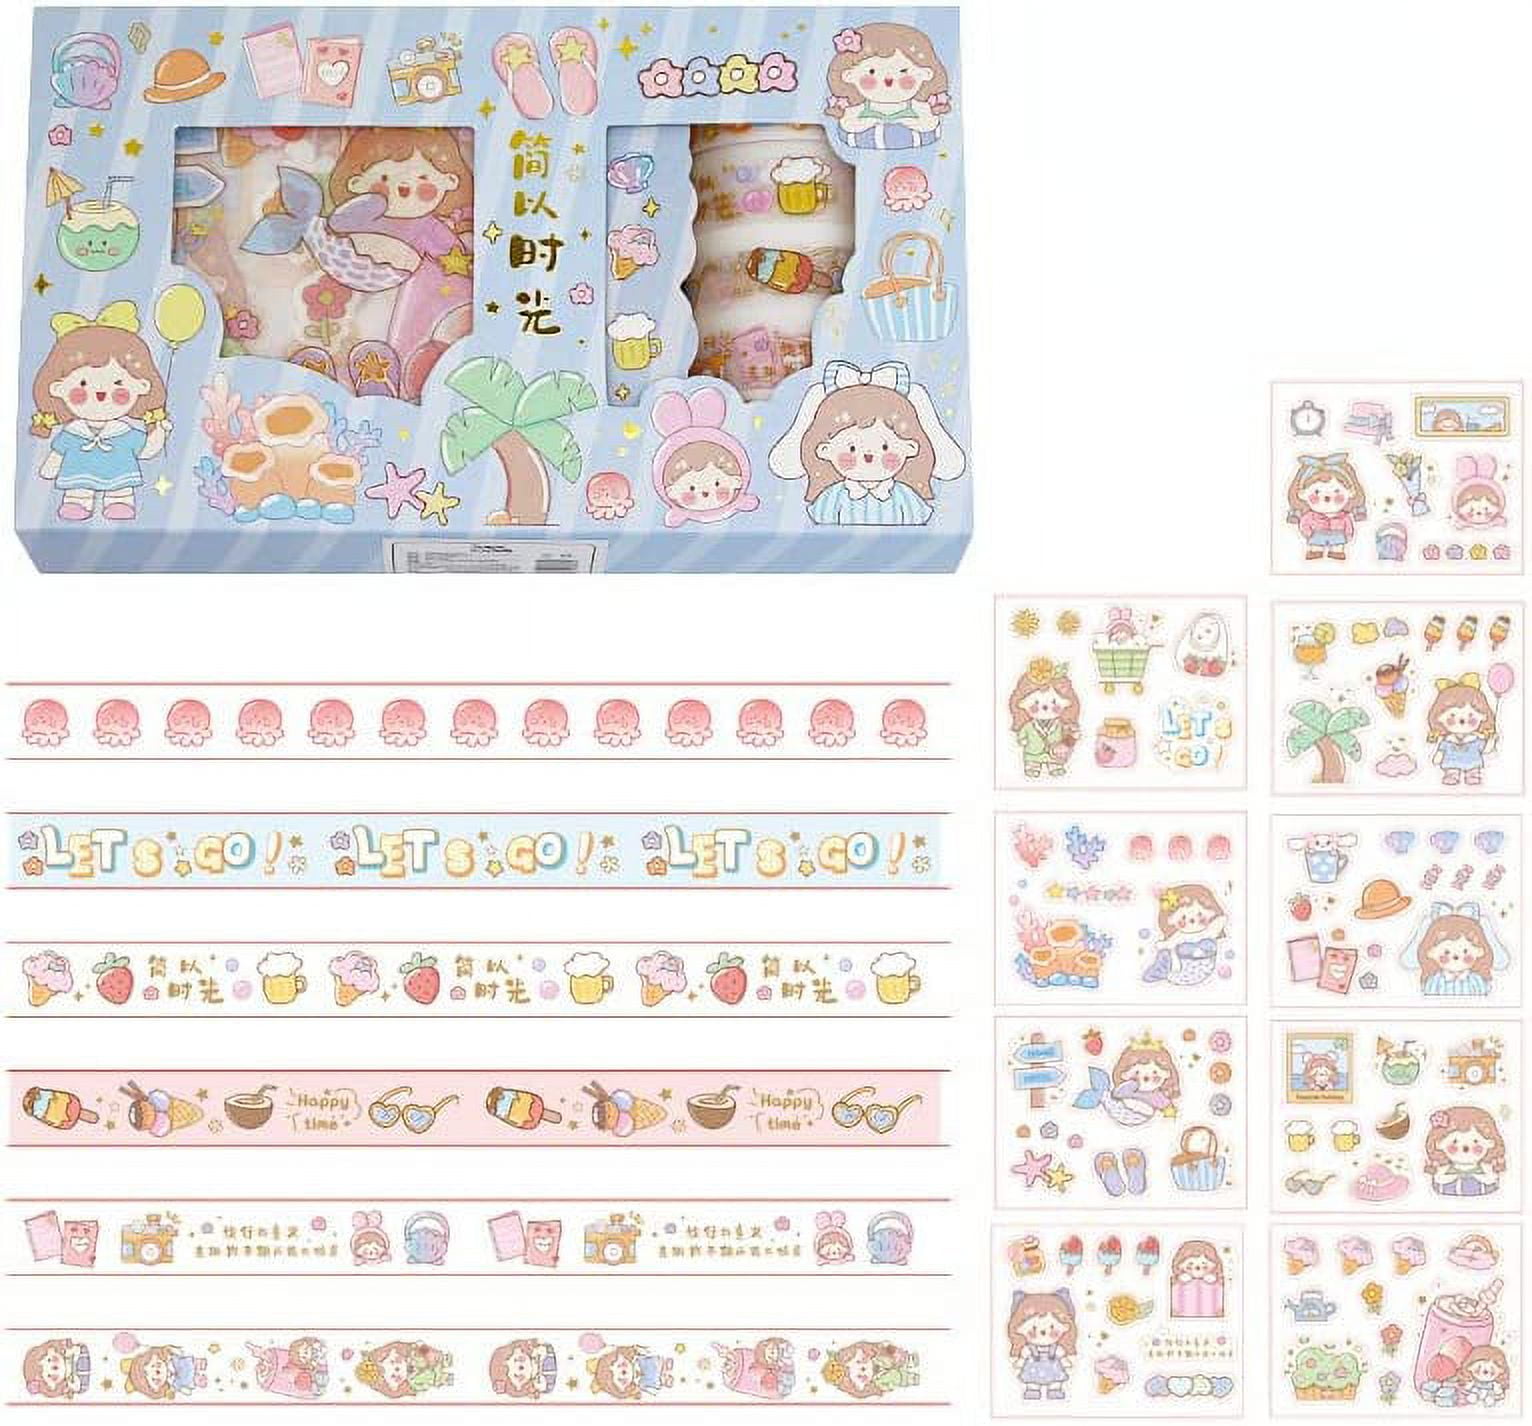 Donut Washi Tape. Planner Decoration. Kawaii Washi Tape. Cute Washi Tape.  Masking Tape. Planner Supplies. Craft Tape. Animal Washi Tape. ·  Magsterarts · Online Store Powered by Storenvy